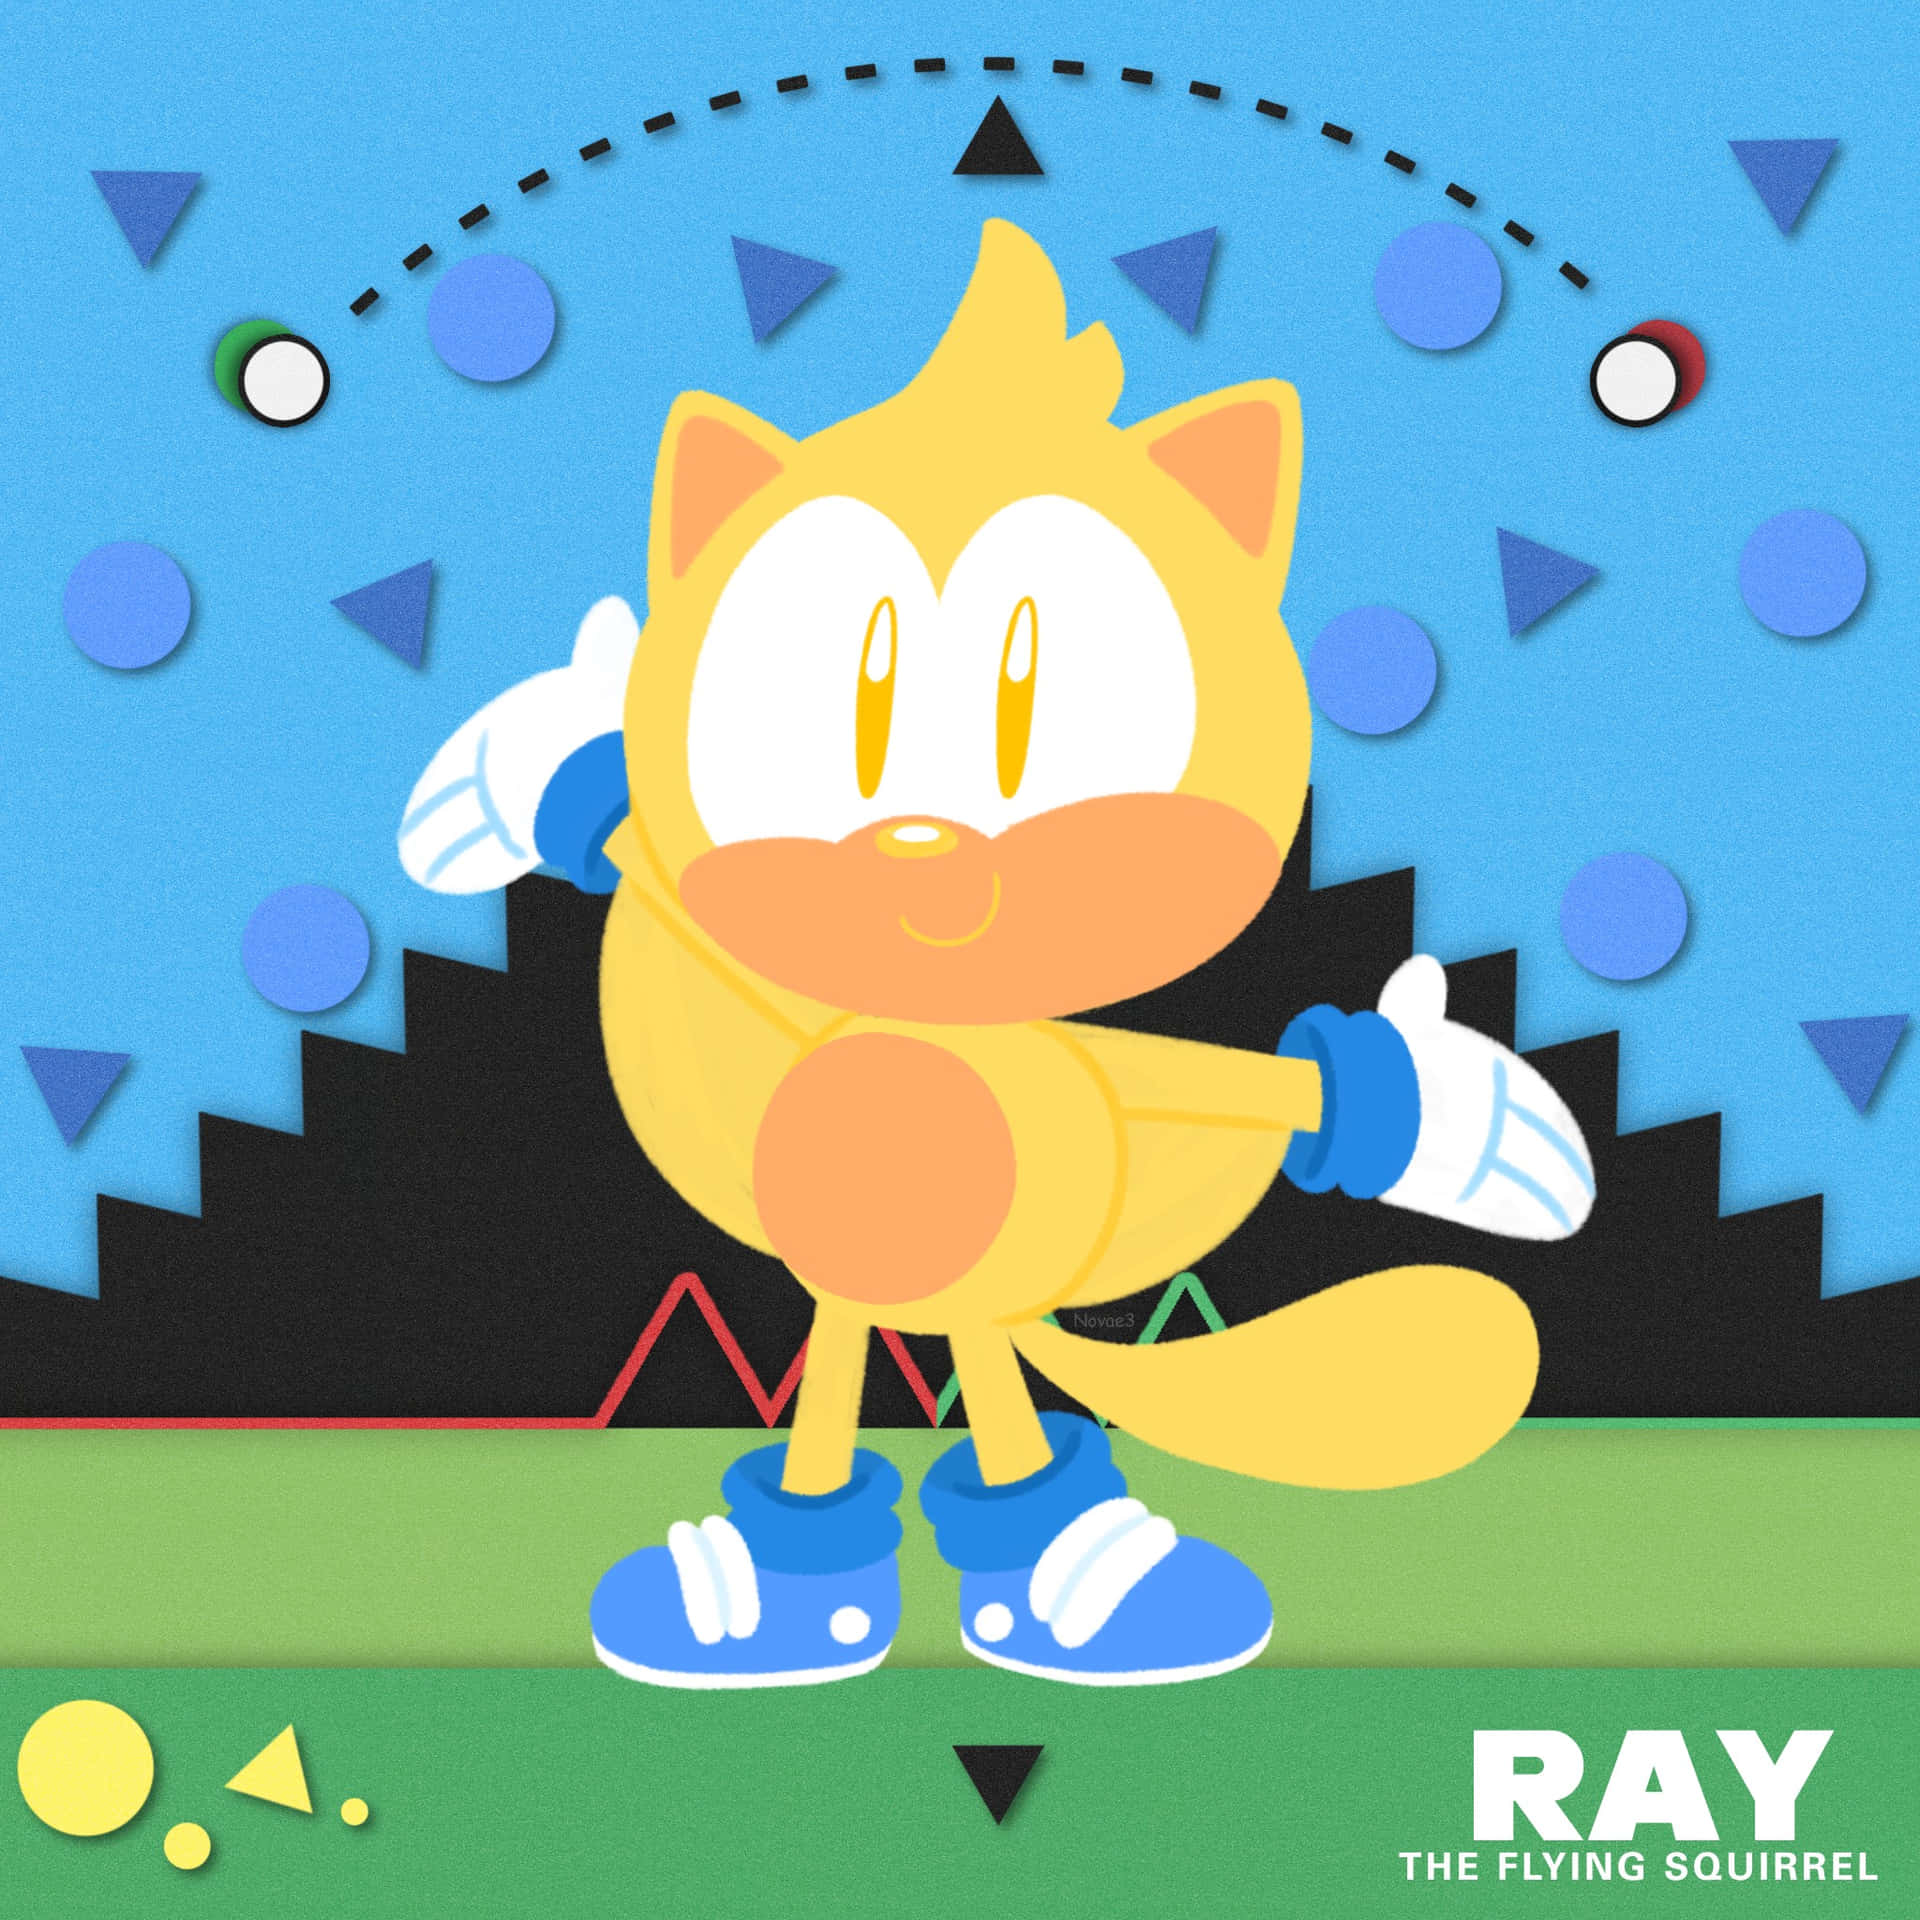 Ray The Flying Squirrel soaring through the sky Wallpaper